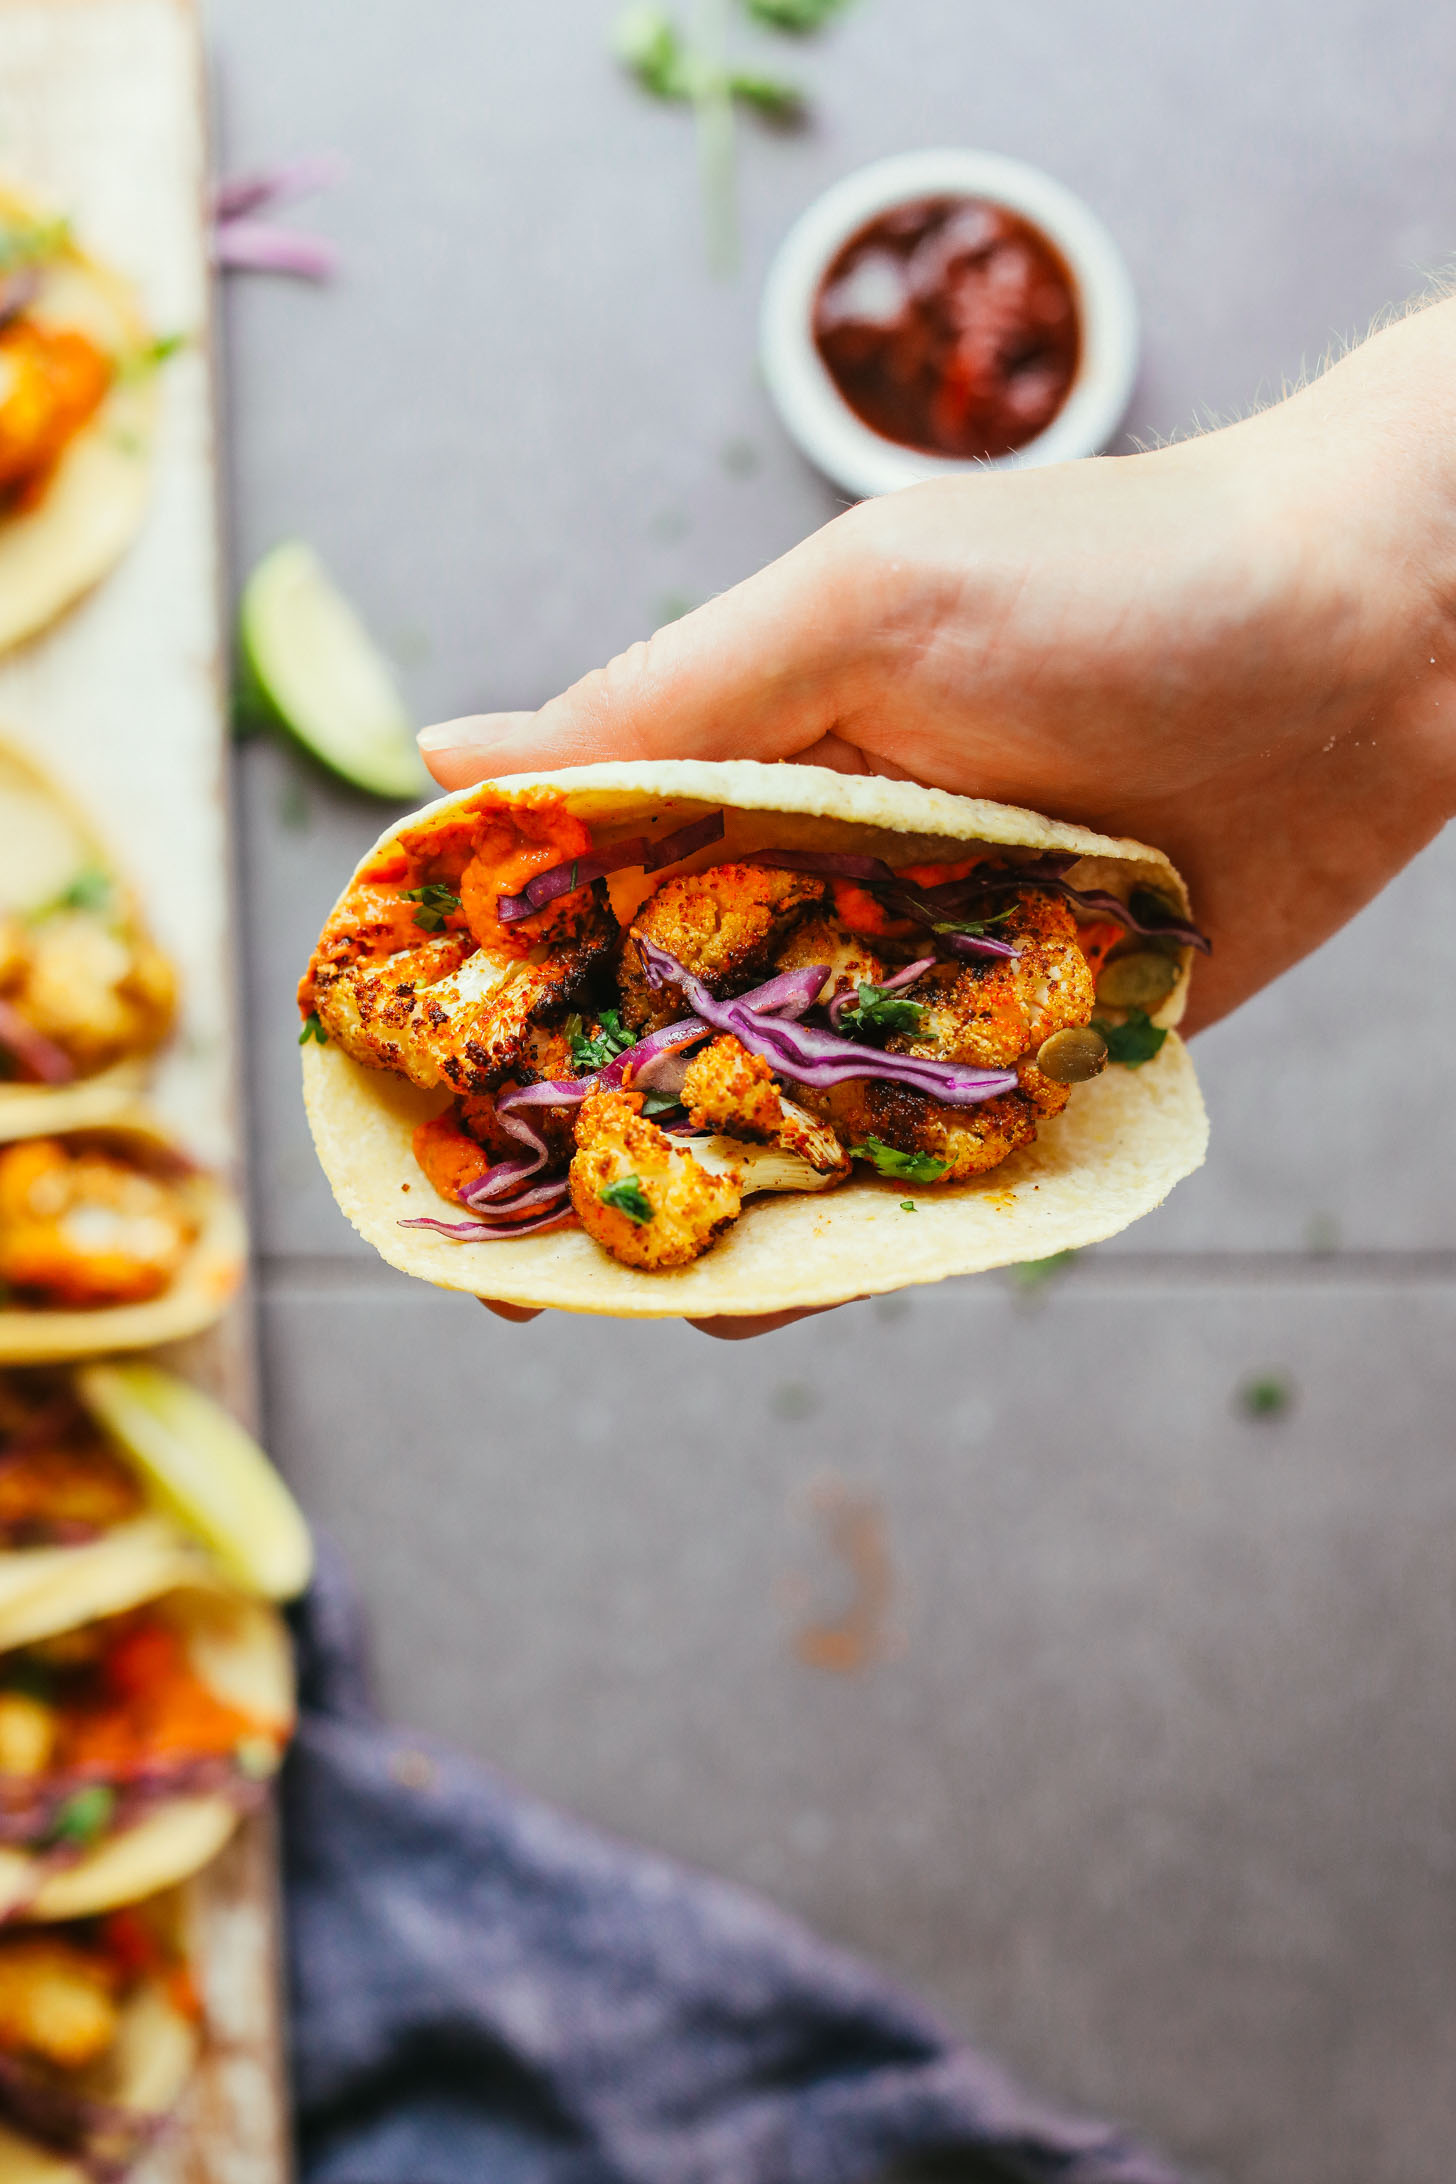 Holding up a vegan taco made with roasted cauliflower and adobo romesco